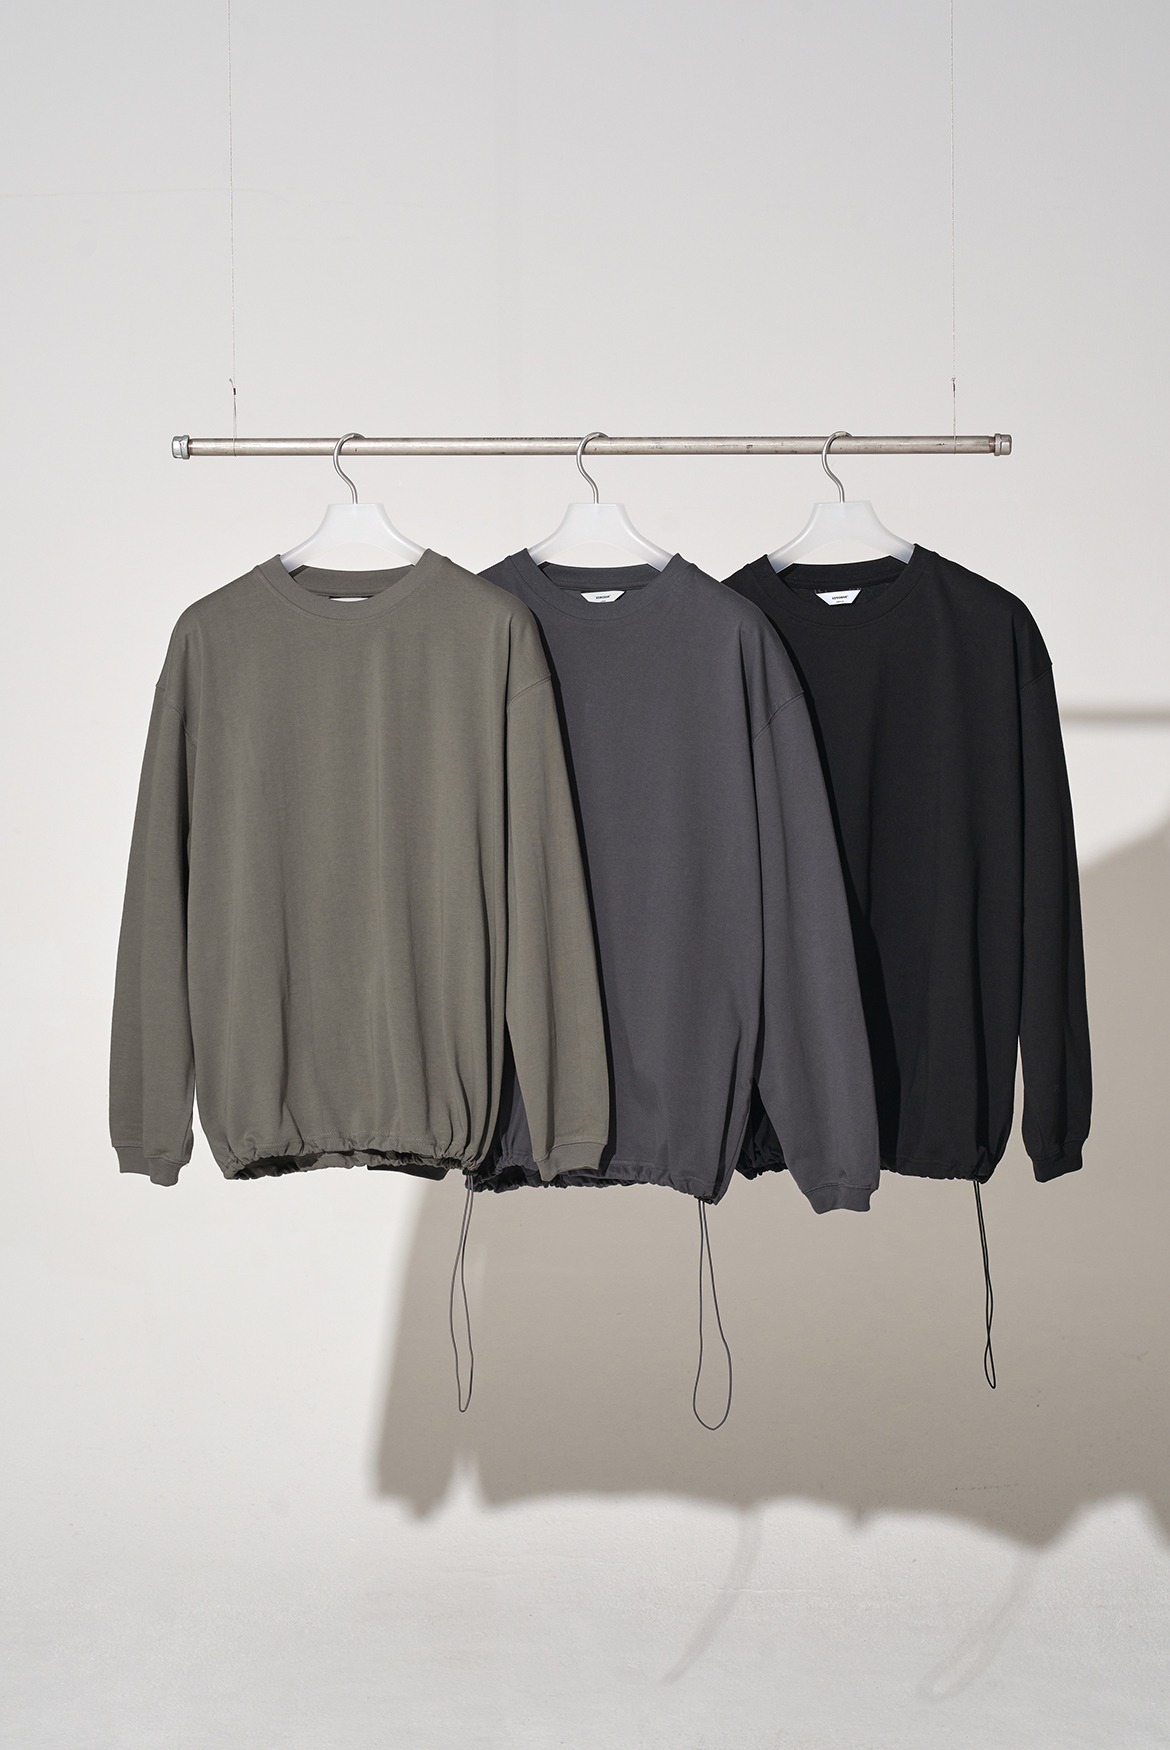 String Long Sleeve T-Shirts [3 Colors]